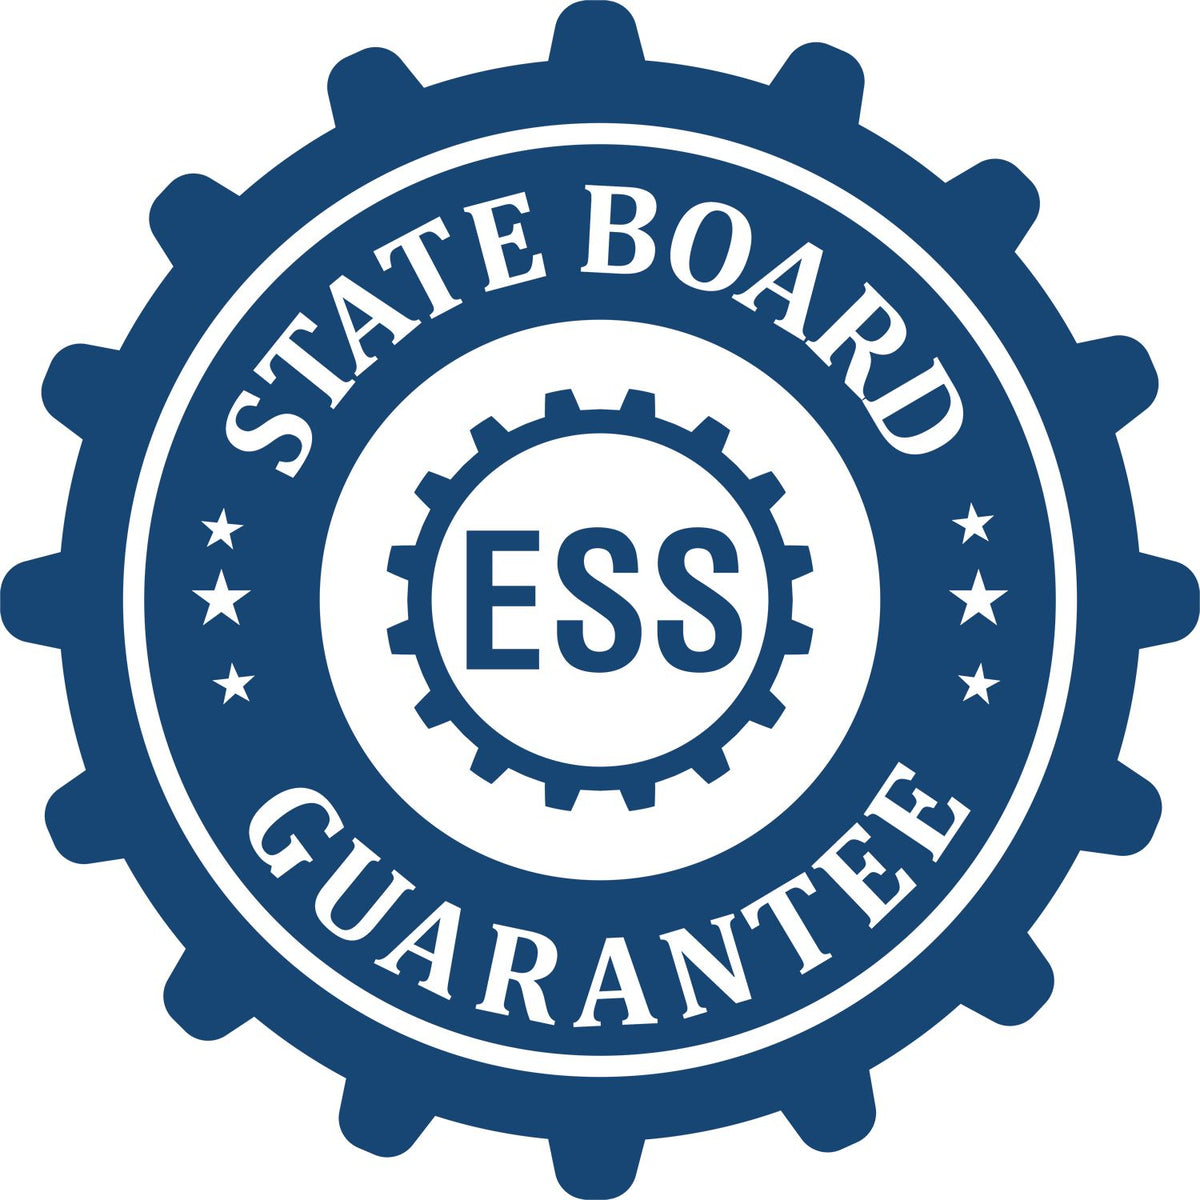 An emblem in a gear shape illustrating a state board guarantee for the New Hampshire Landscape Architectural Seal Stamp product.